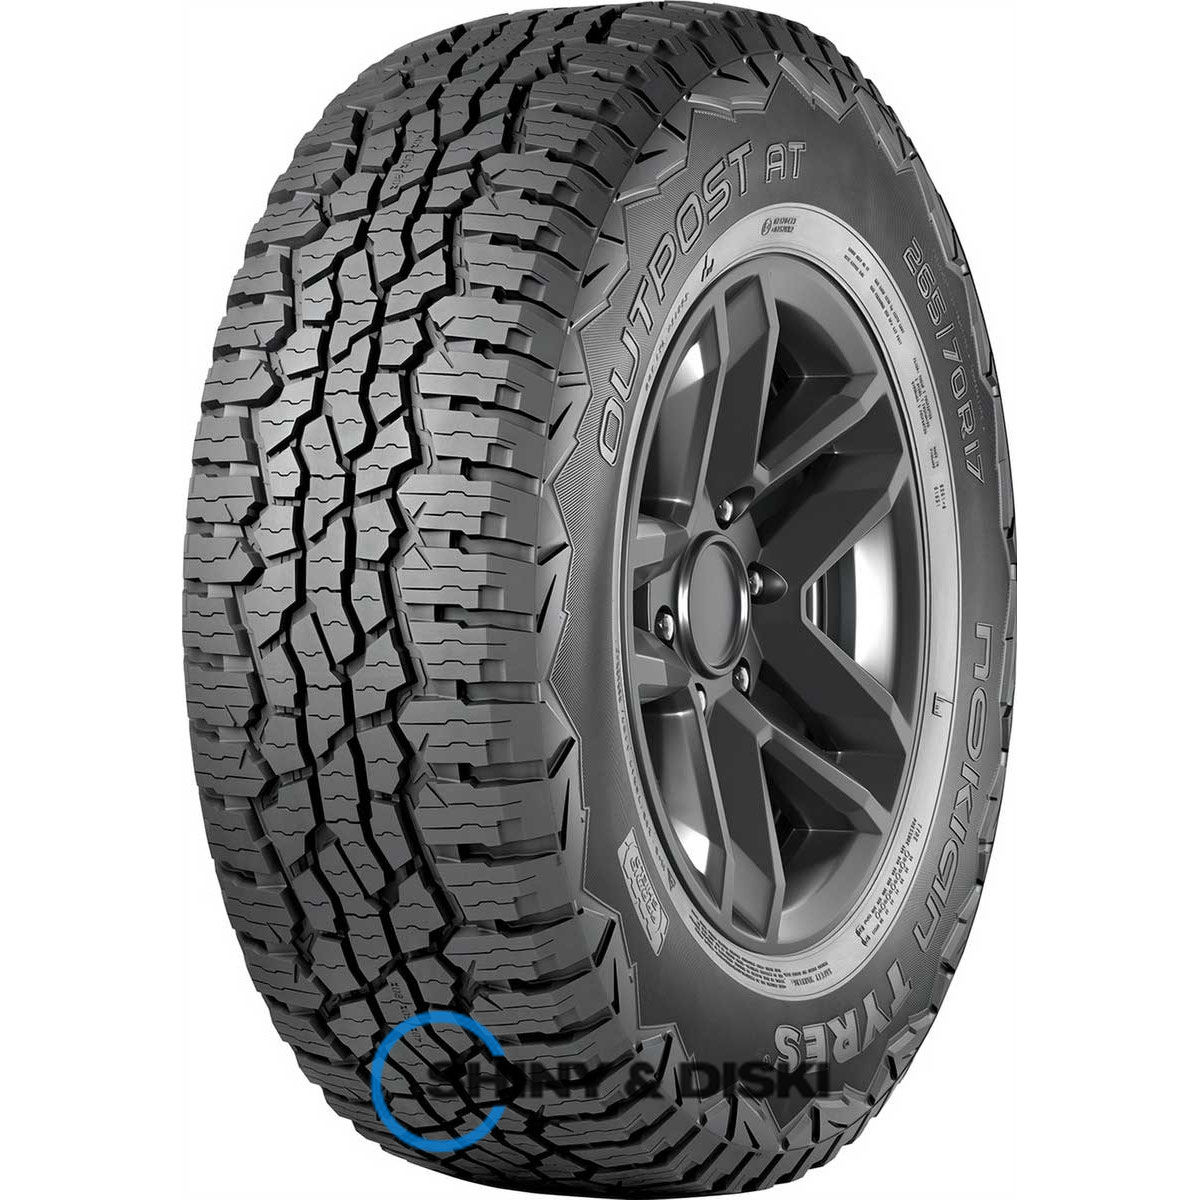 nokian outpost at 275/55 r20 120/117s